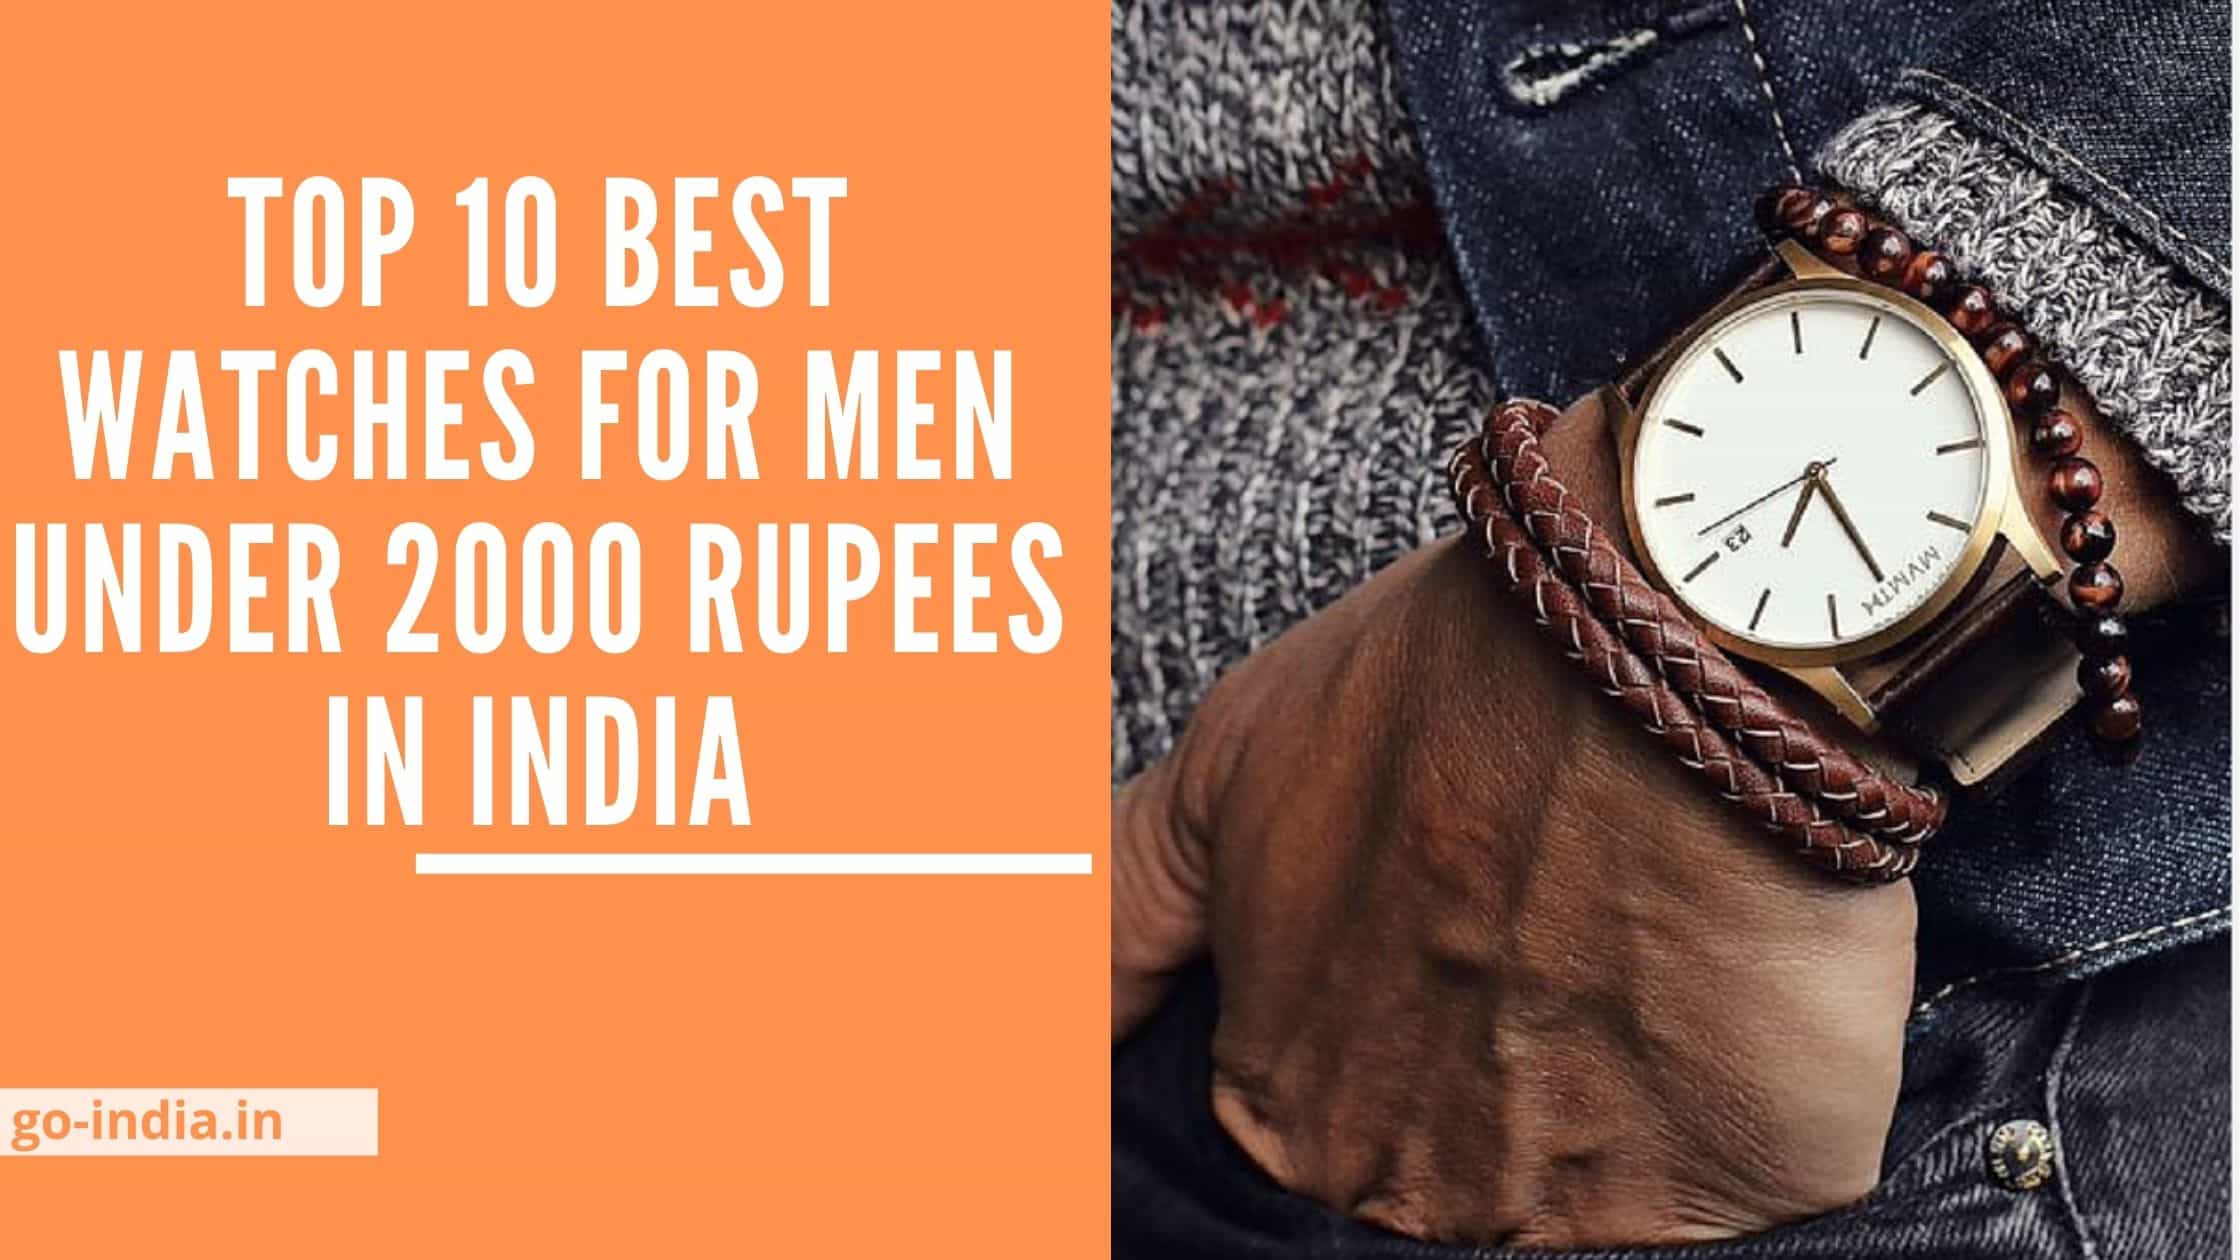 Top 10 Best Watches For Men Under 2000 Rupees in India